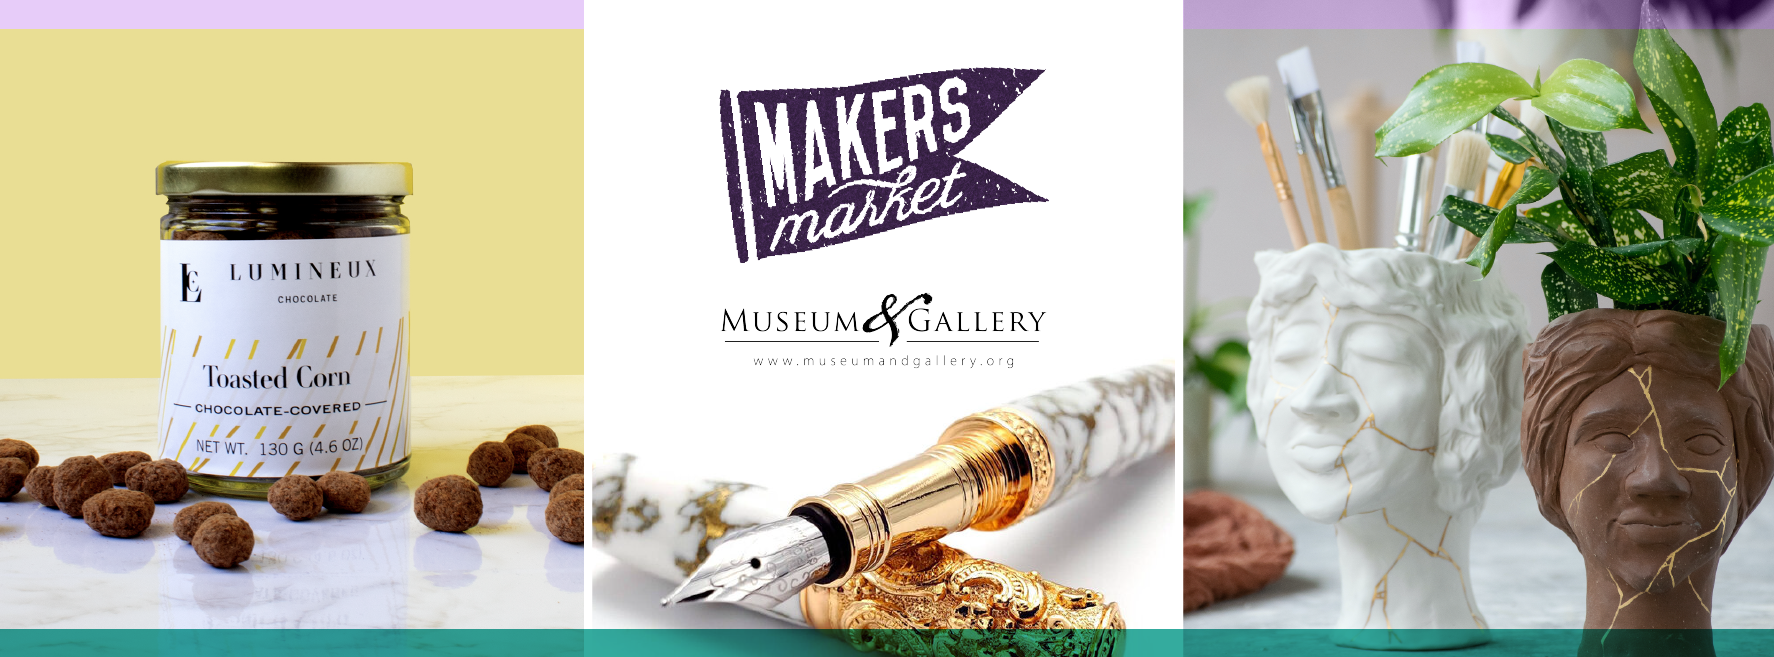 M&G Annual Makers Market